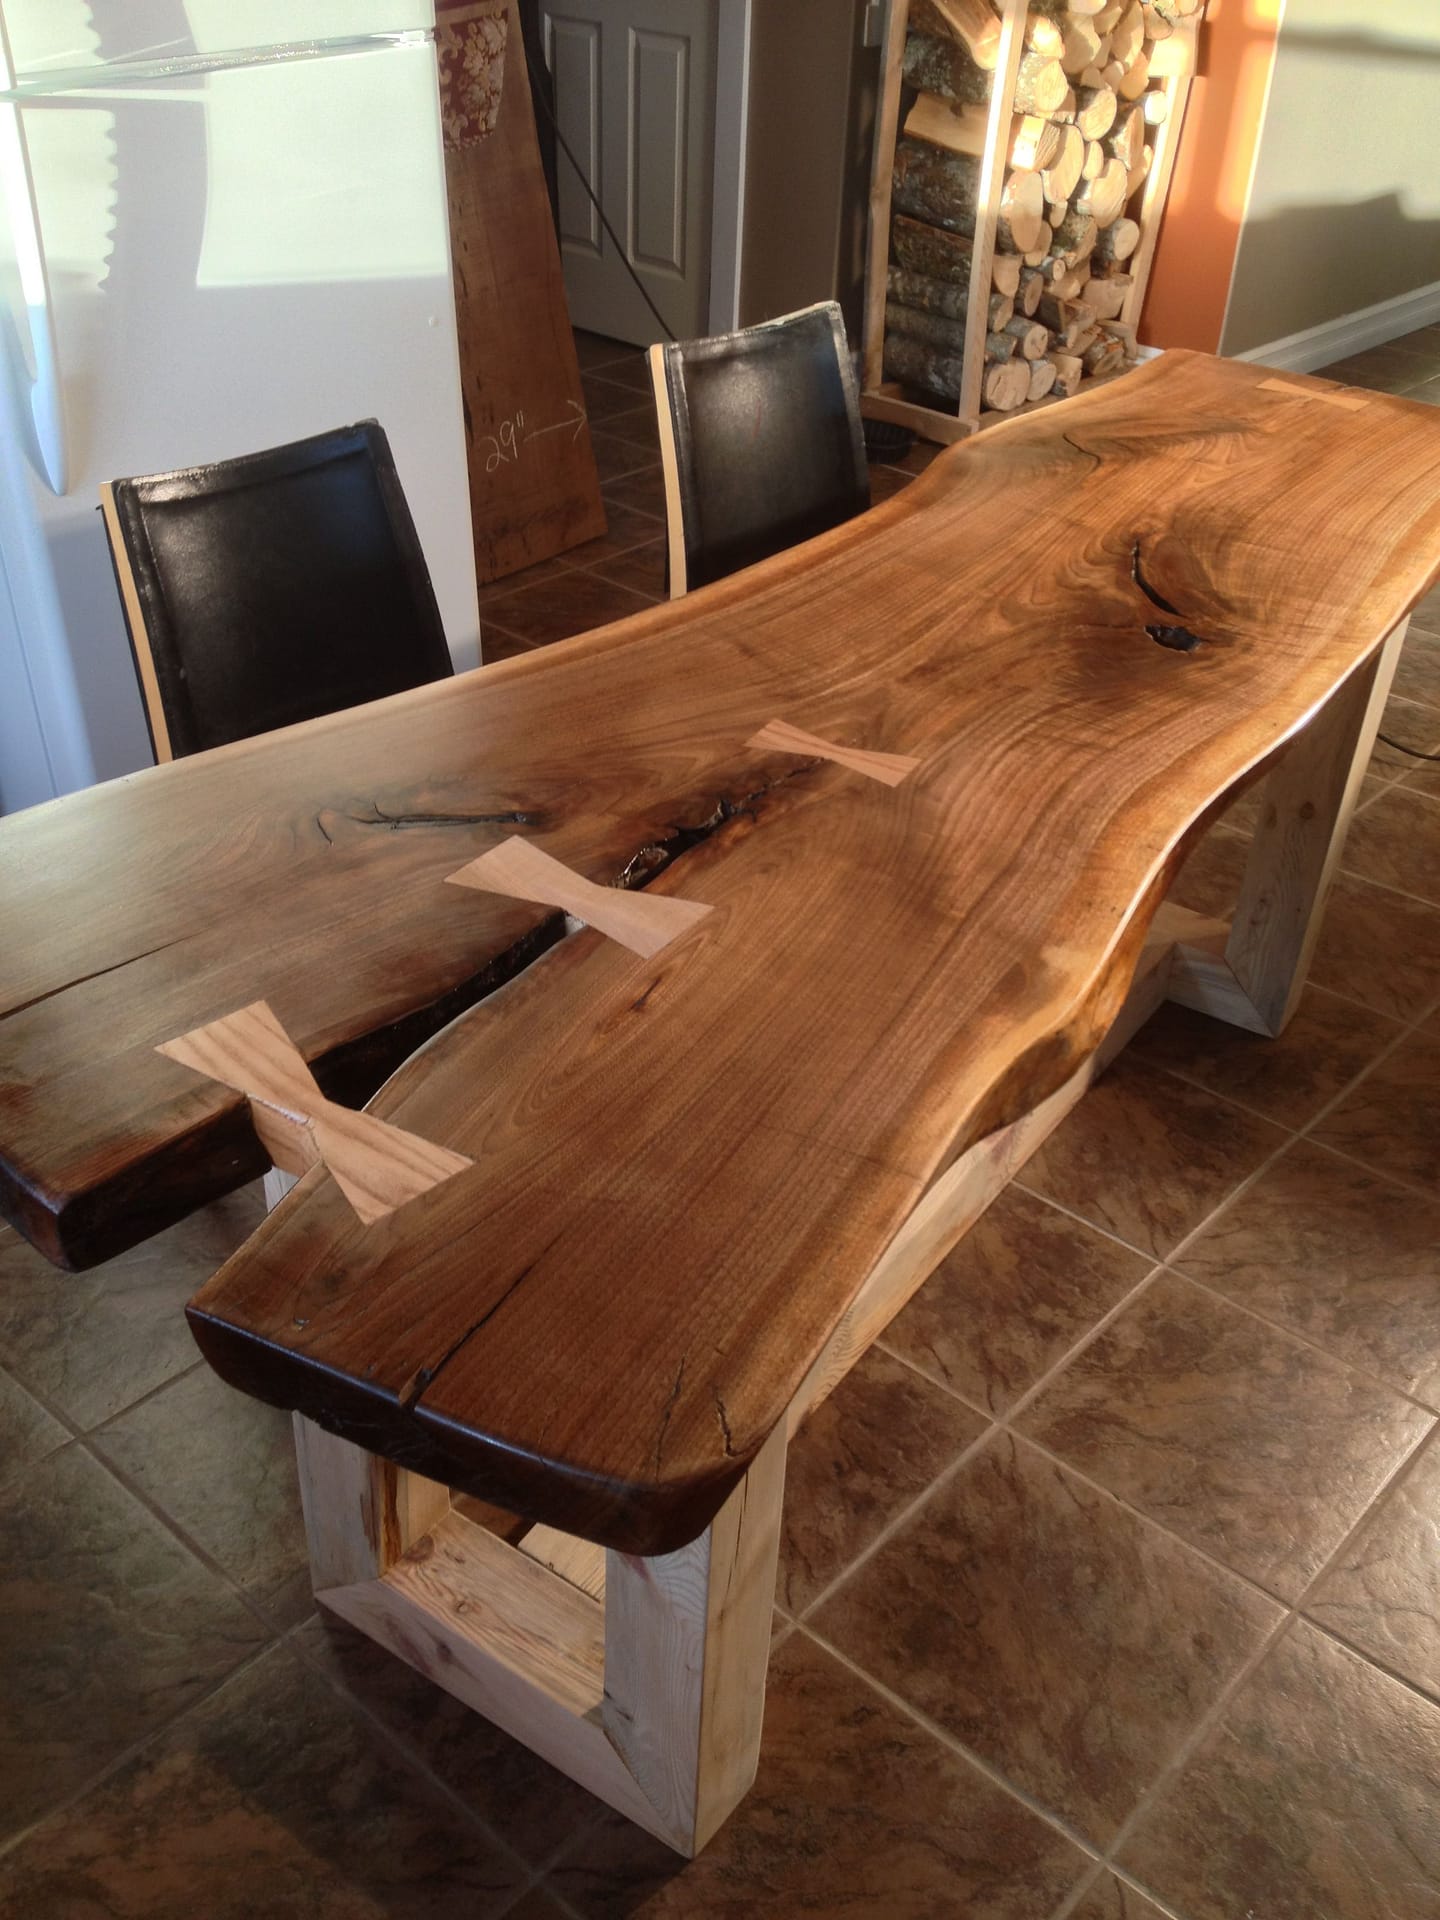 live edge table dining rooms rustic | Live edge dining table, Rustic